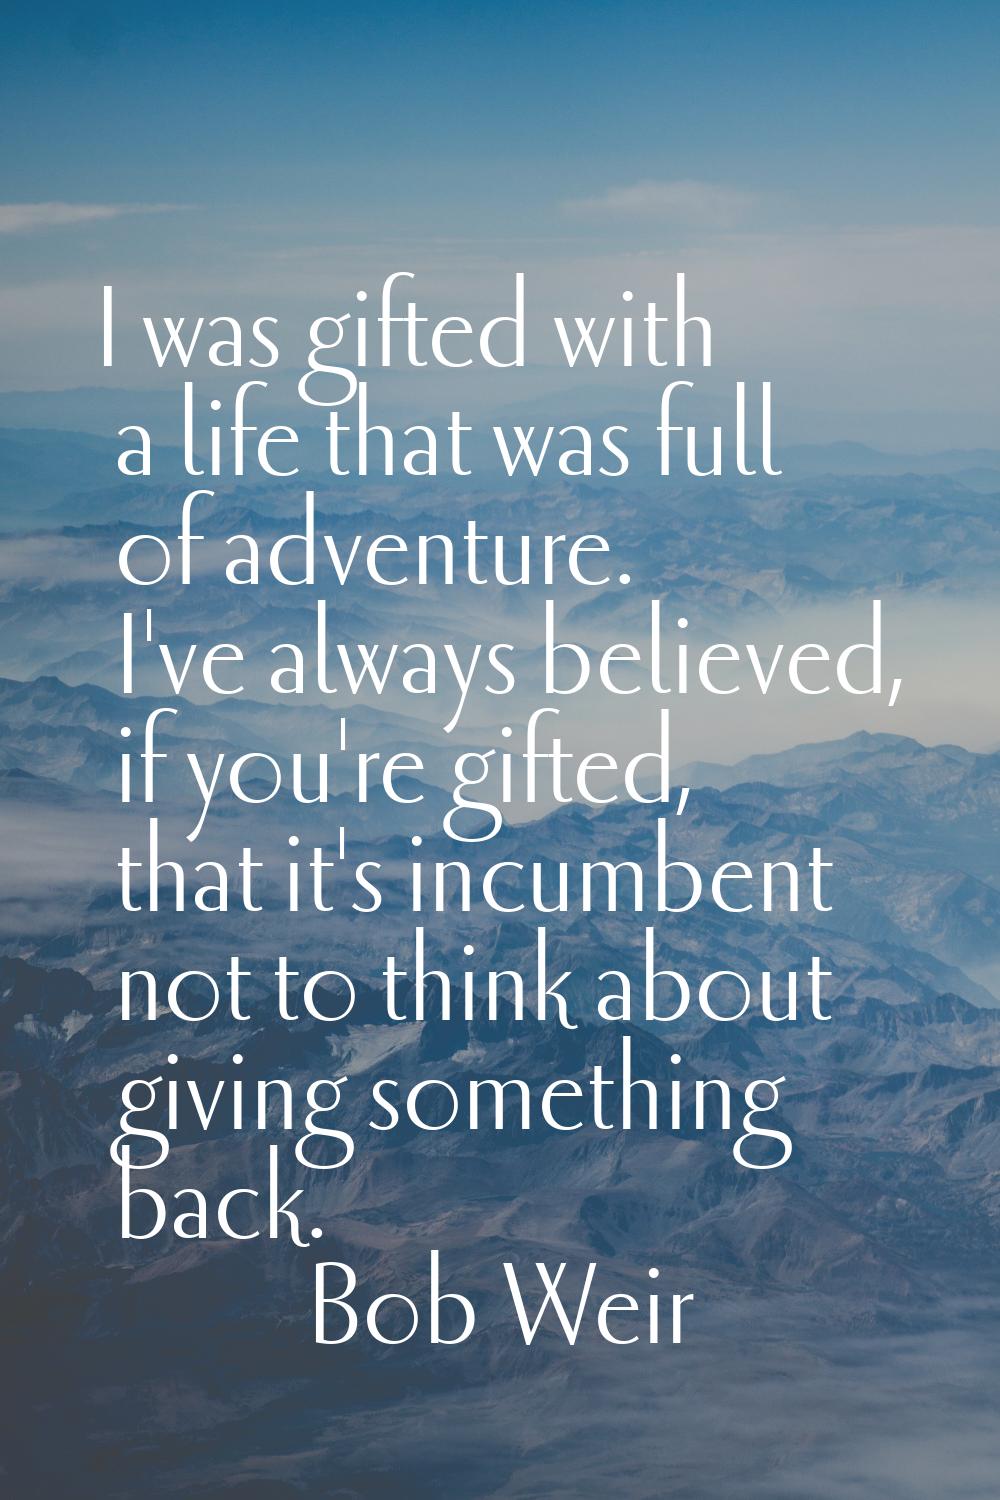 I was gifted with a life that was full of adventure. I've always believed, if you're gifted, that i